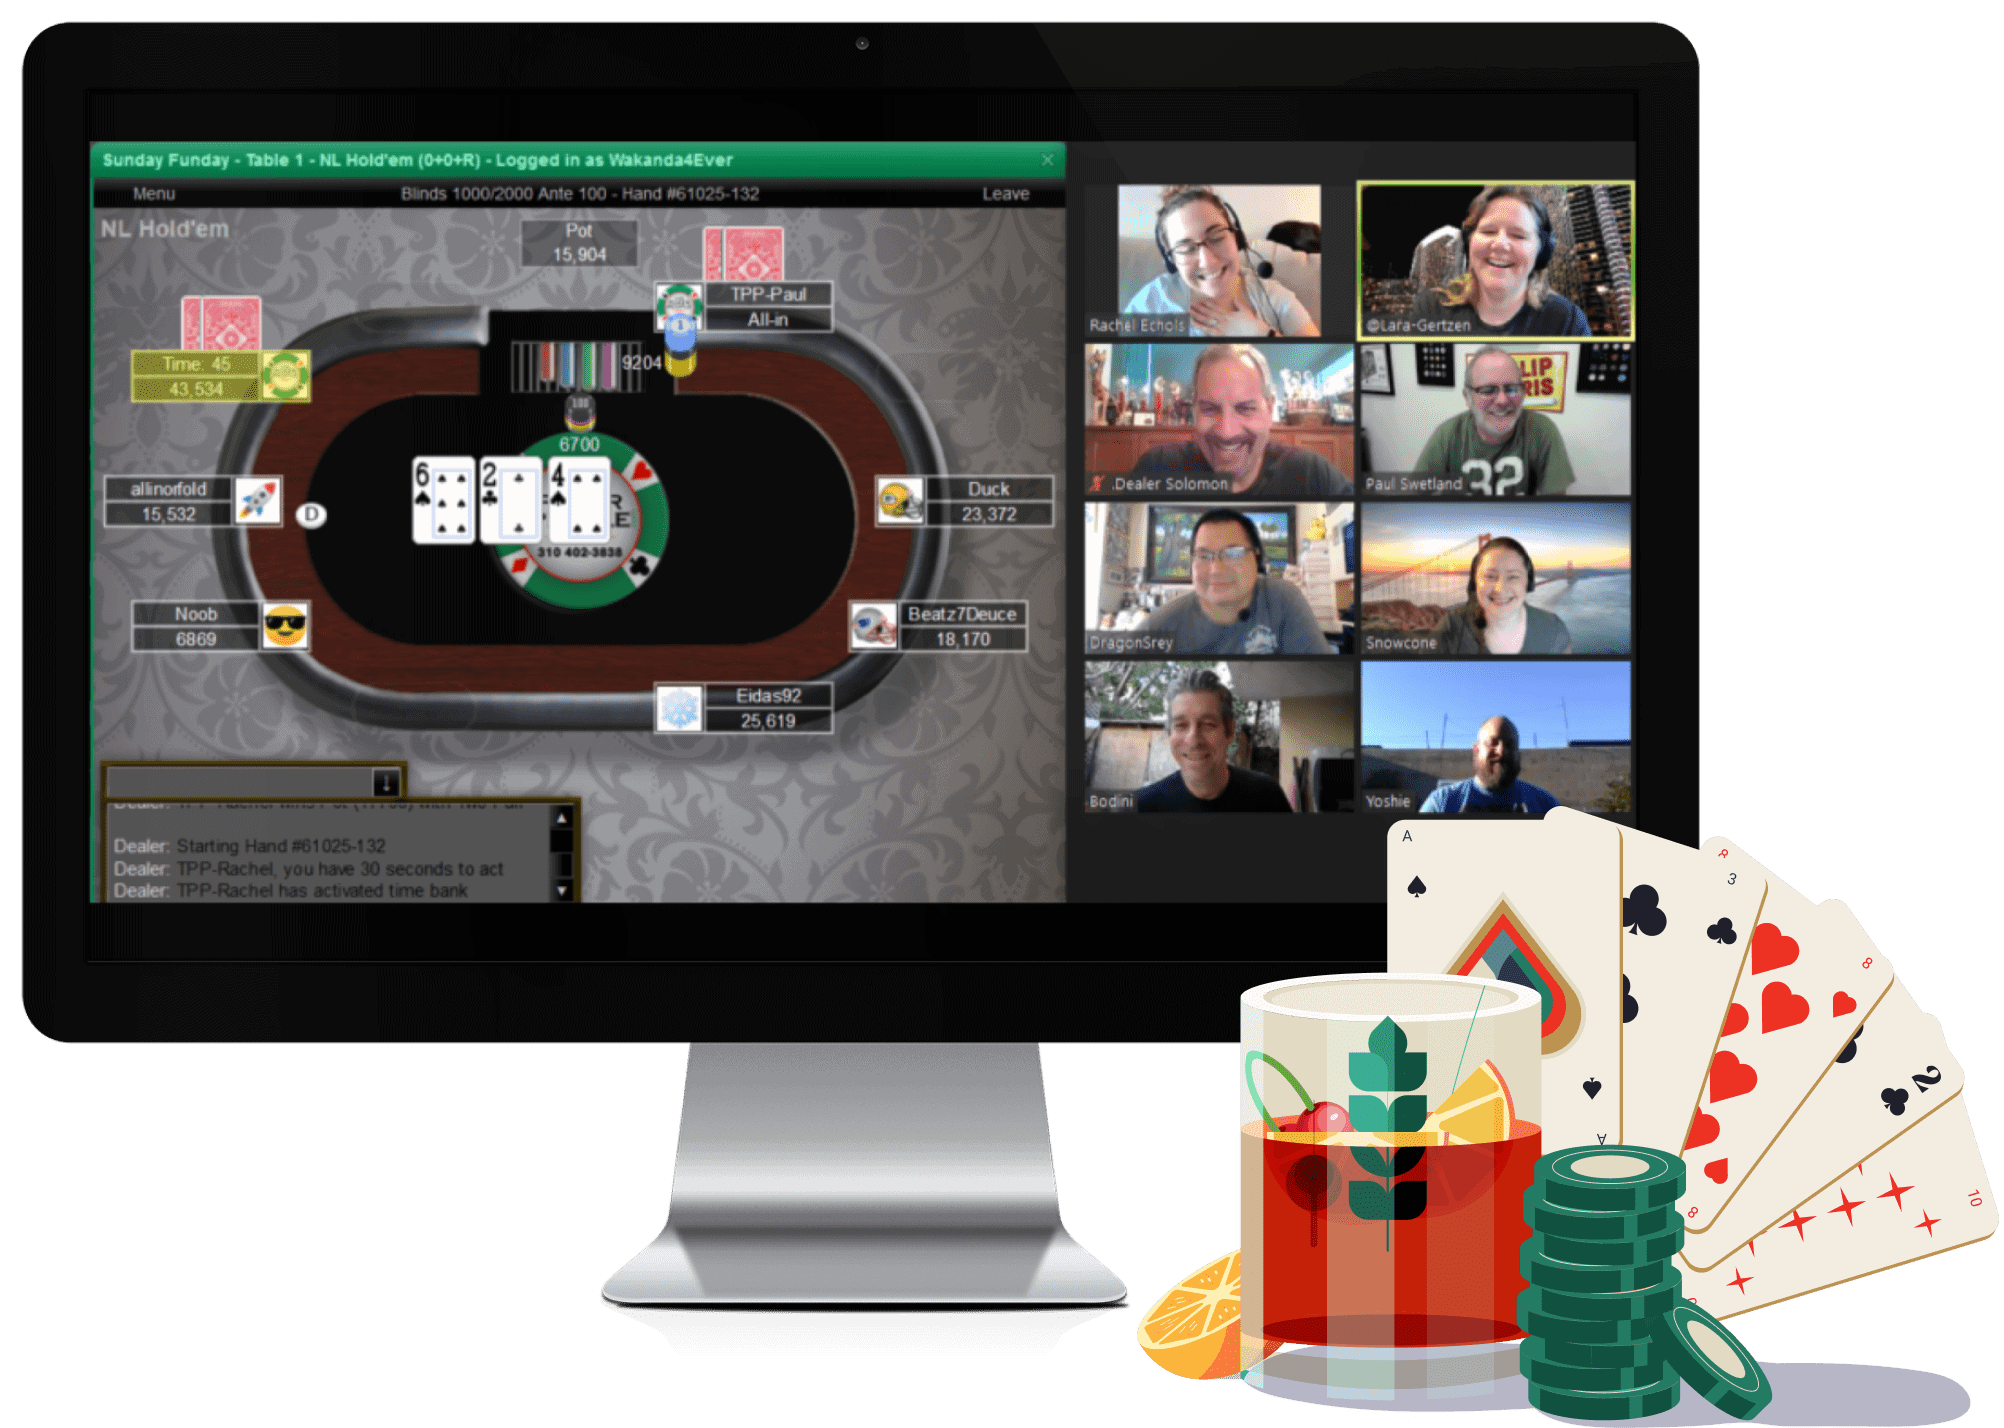 Virtual team event poker with people and dealer on a computer.